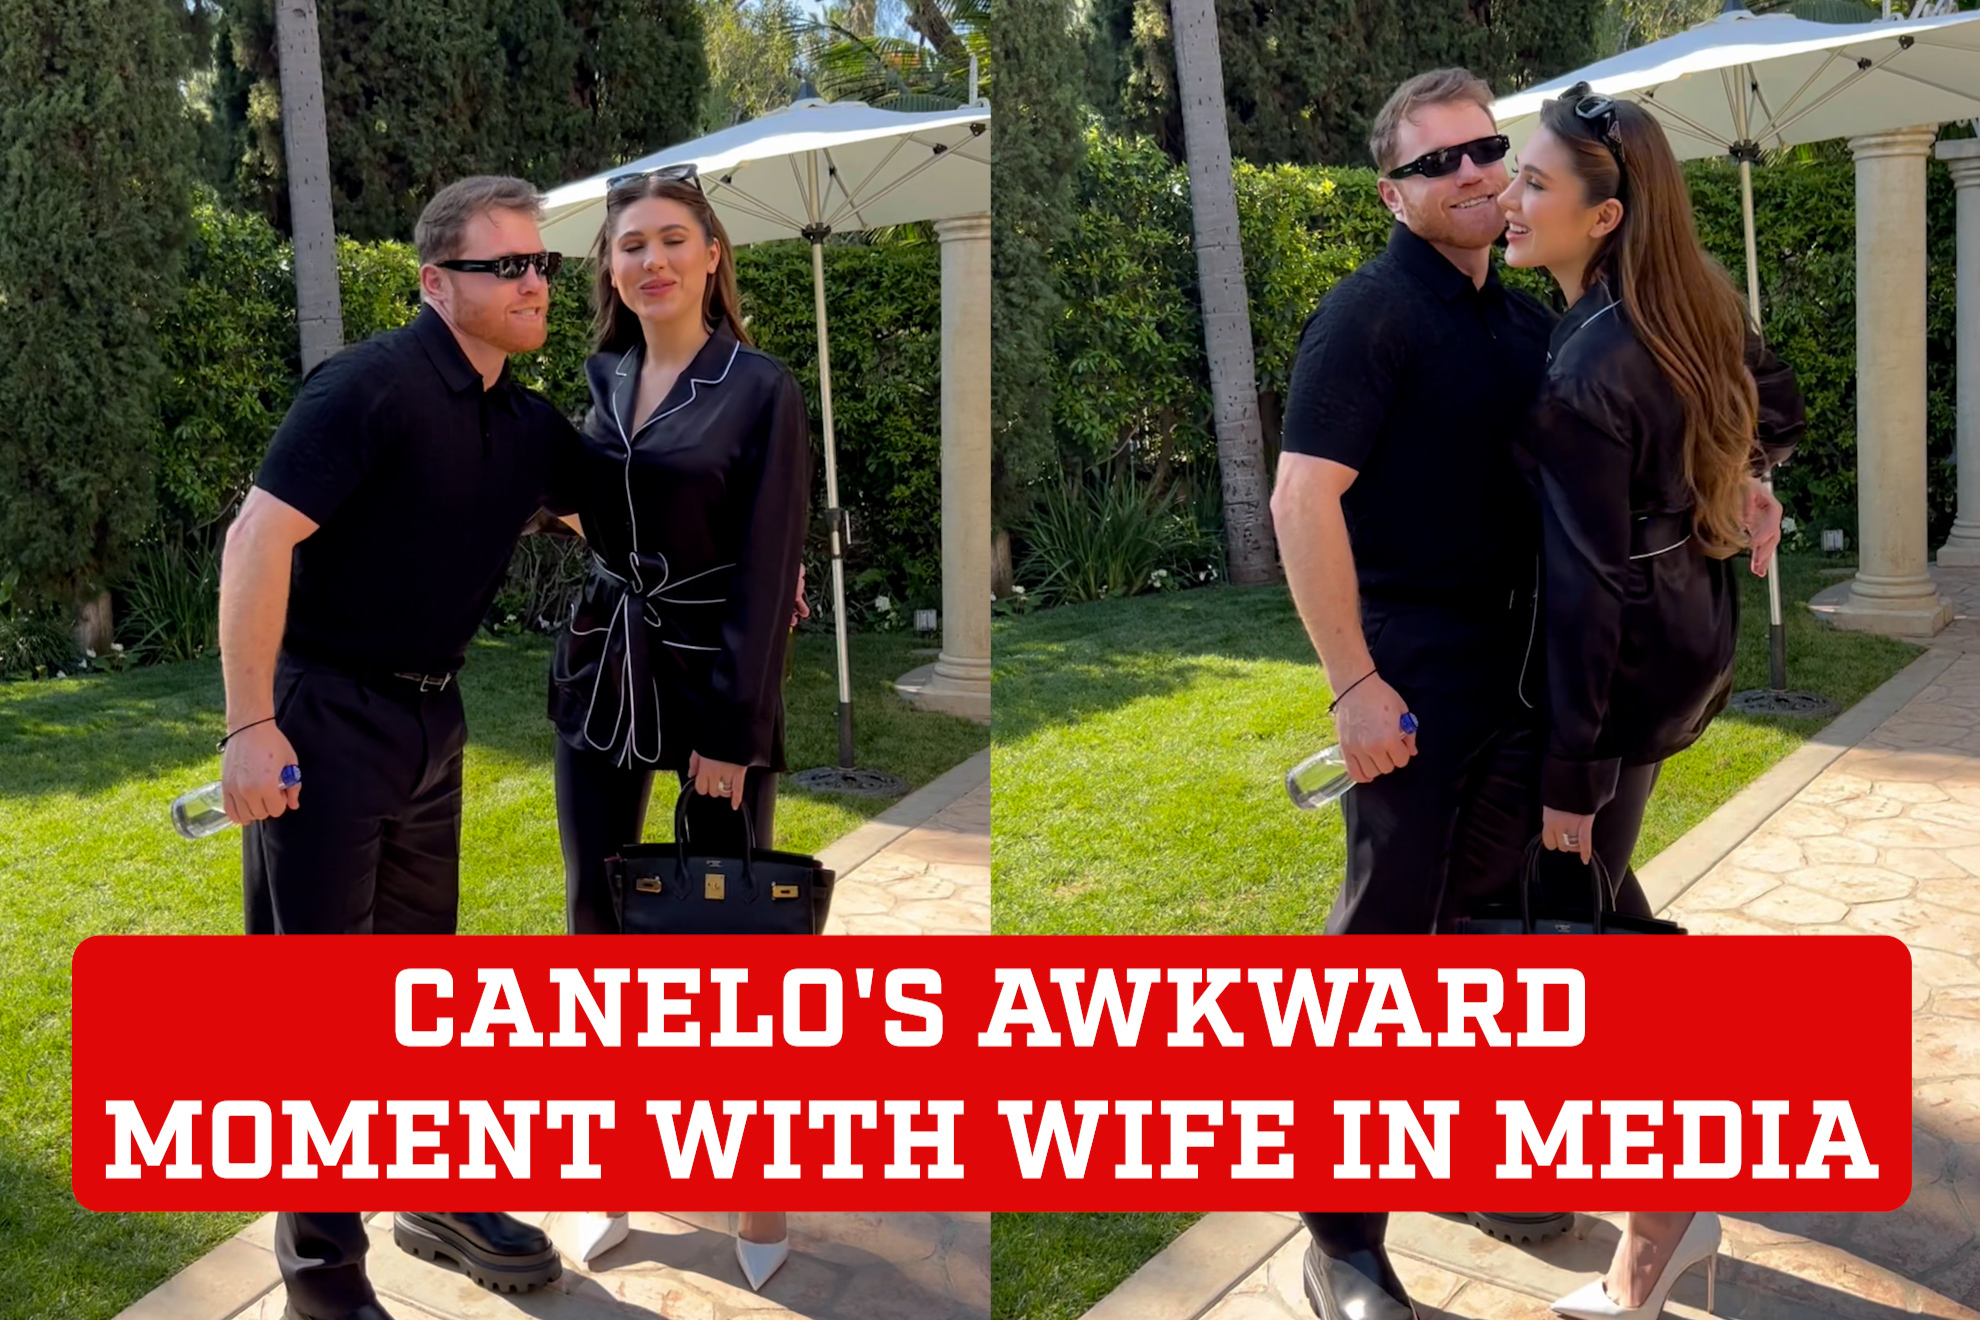 Canelo Alvarez has awkward moment with his wife in front of the media